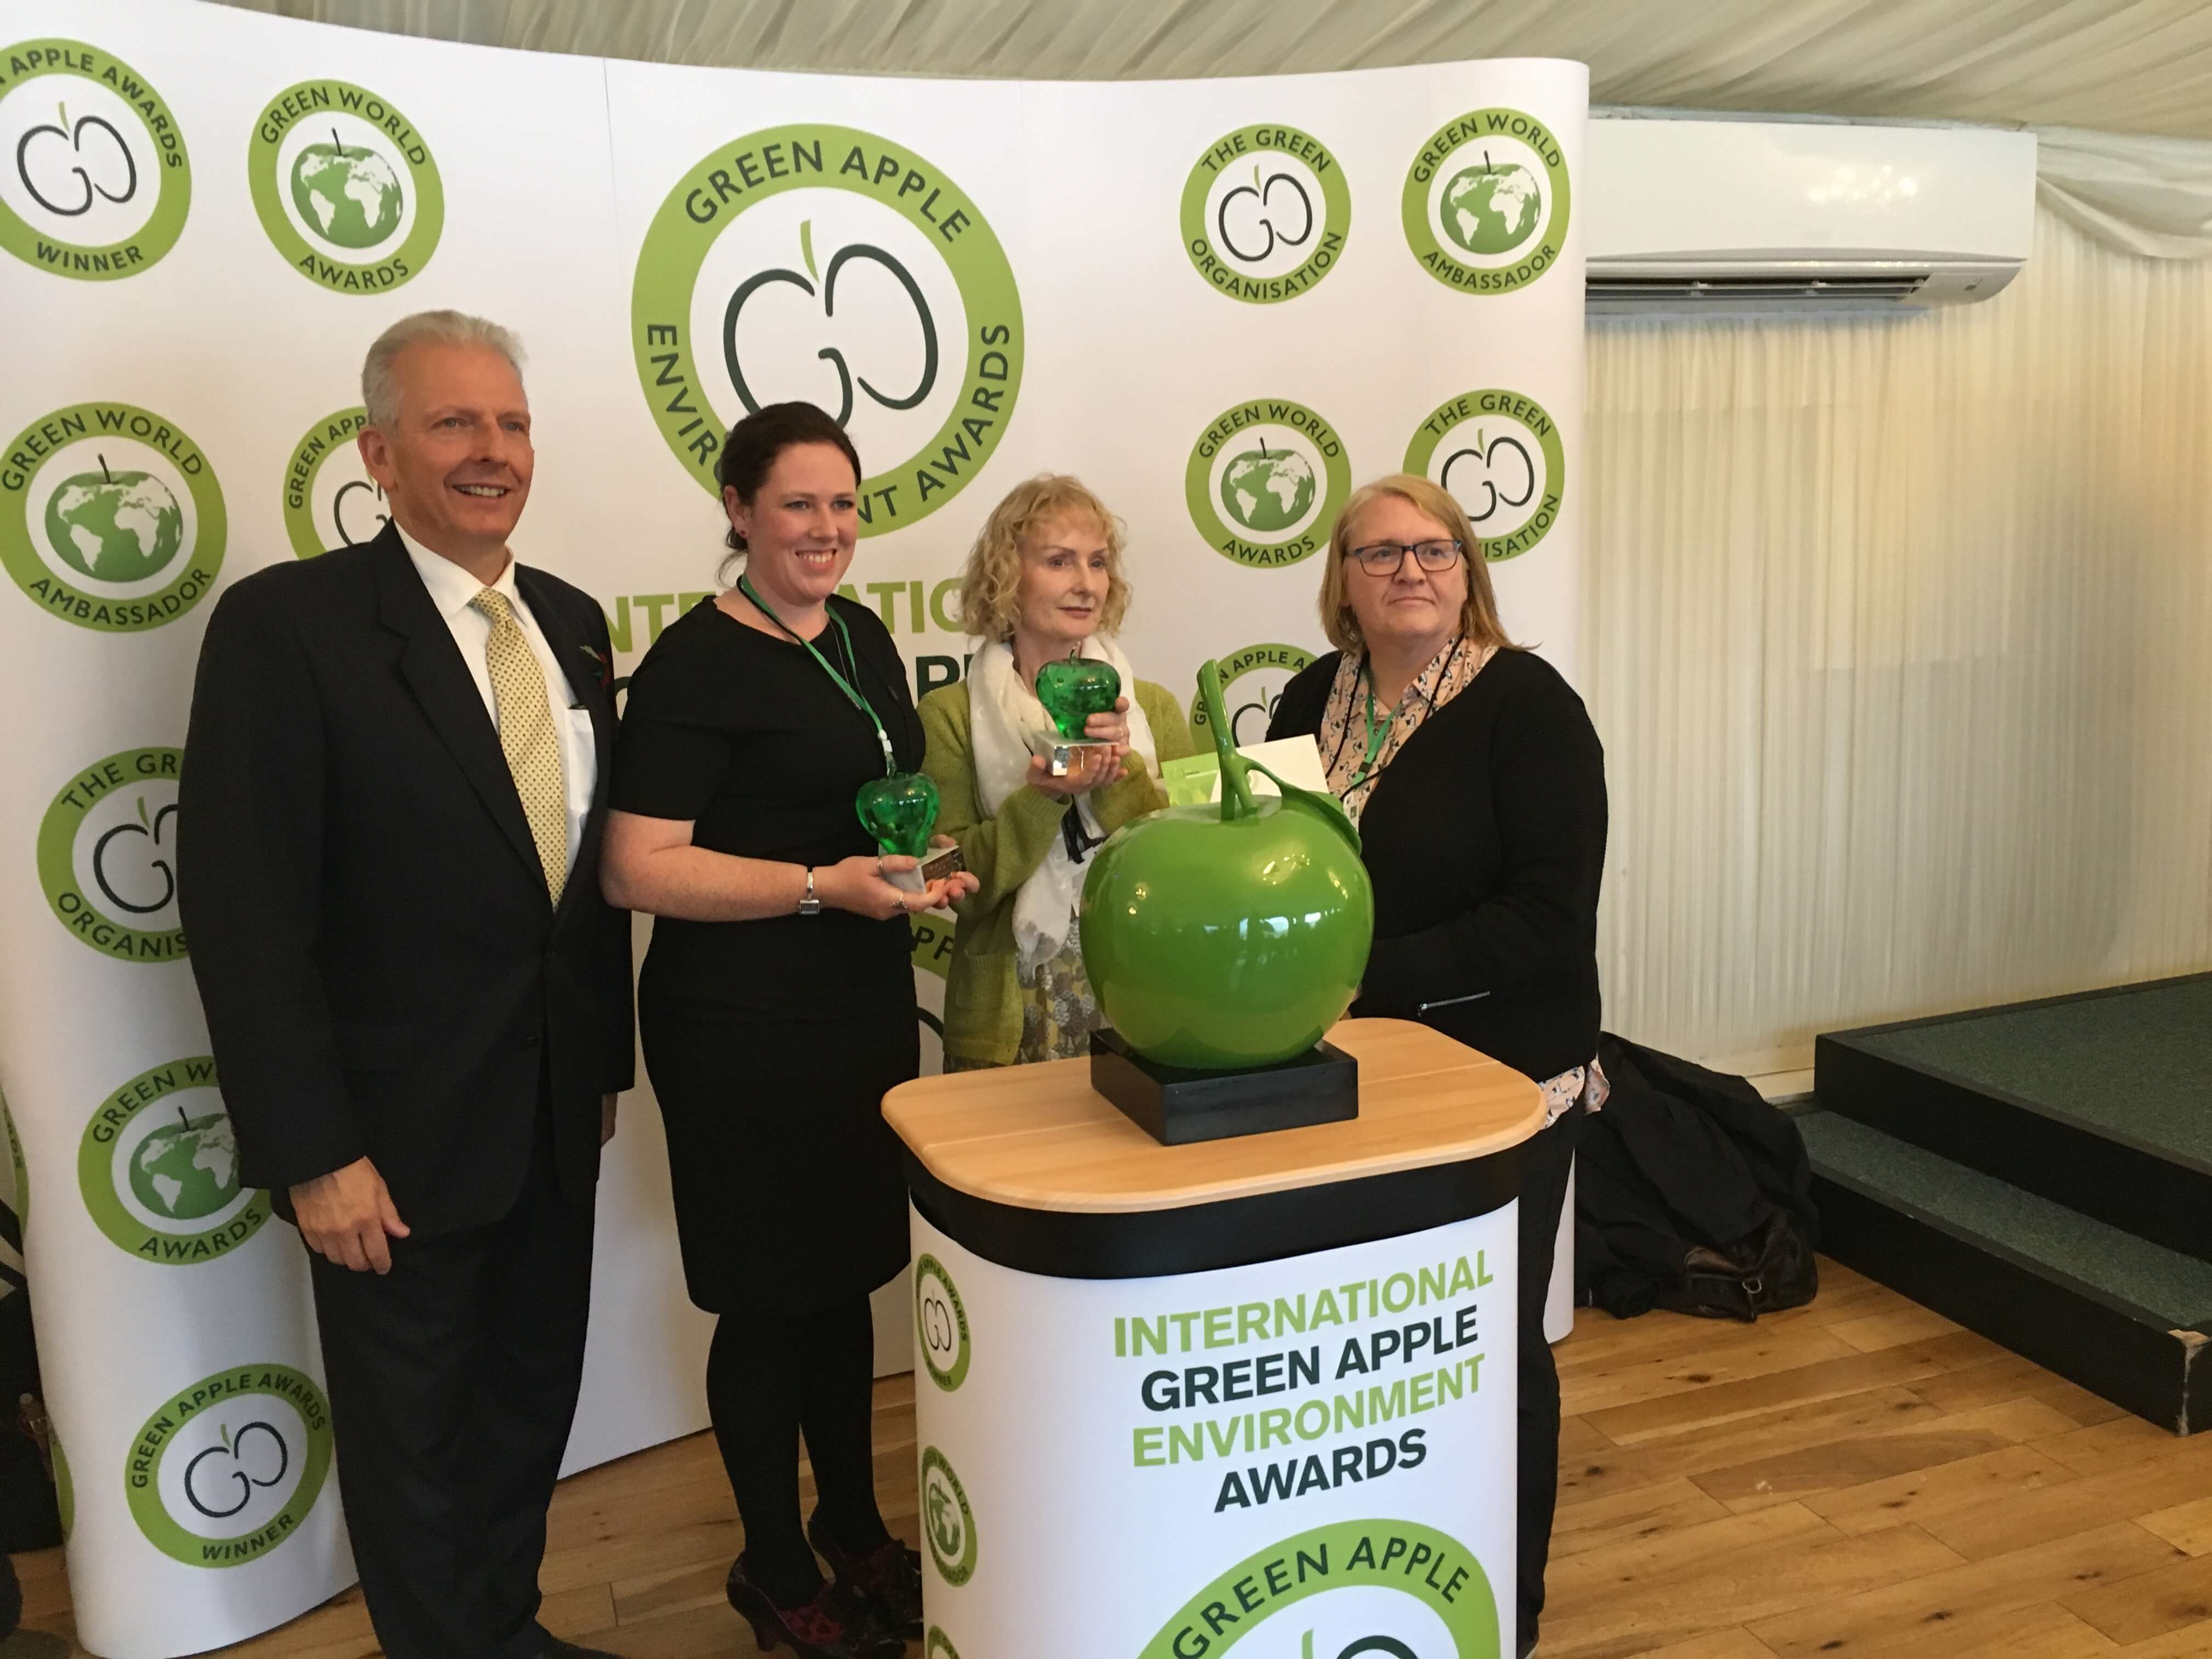 Golden delicious – three Green Apple Awards for Environmental Best Practice image